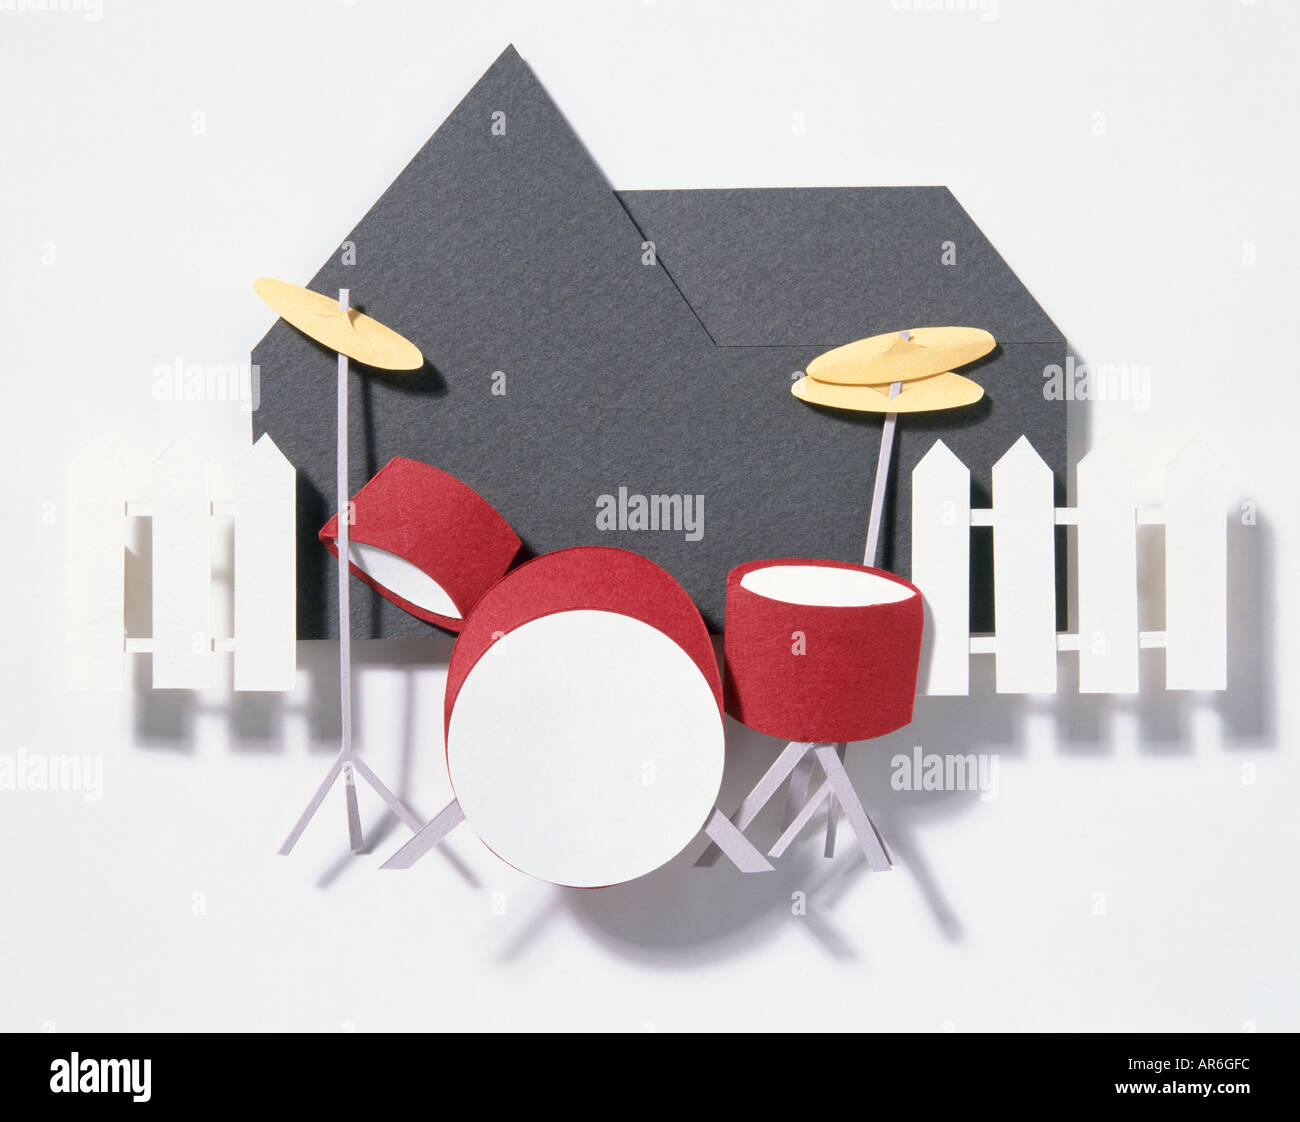 Paper model of a drum kit, red drums with gold symbol, outside black  silhouetted of house and white picket fence Stock Photo - Alamy